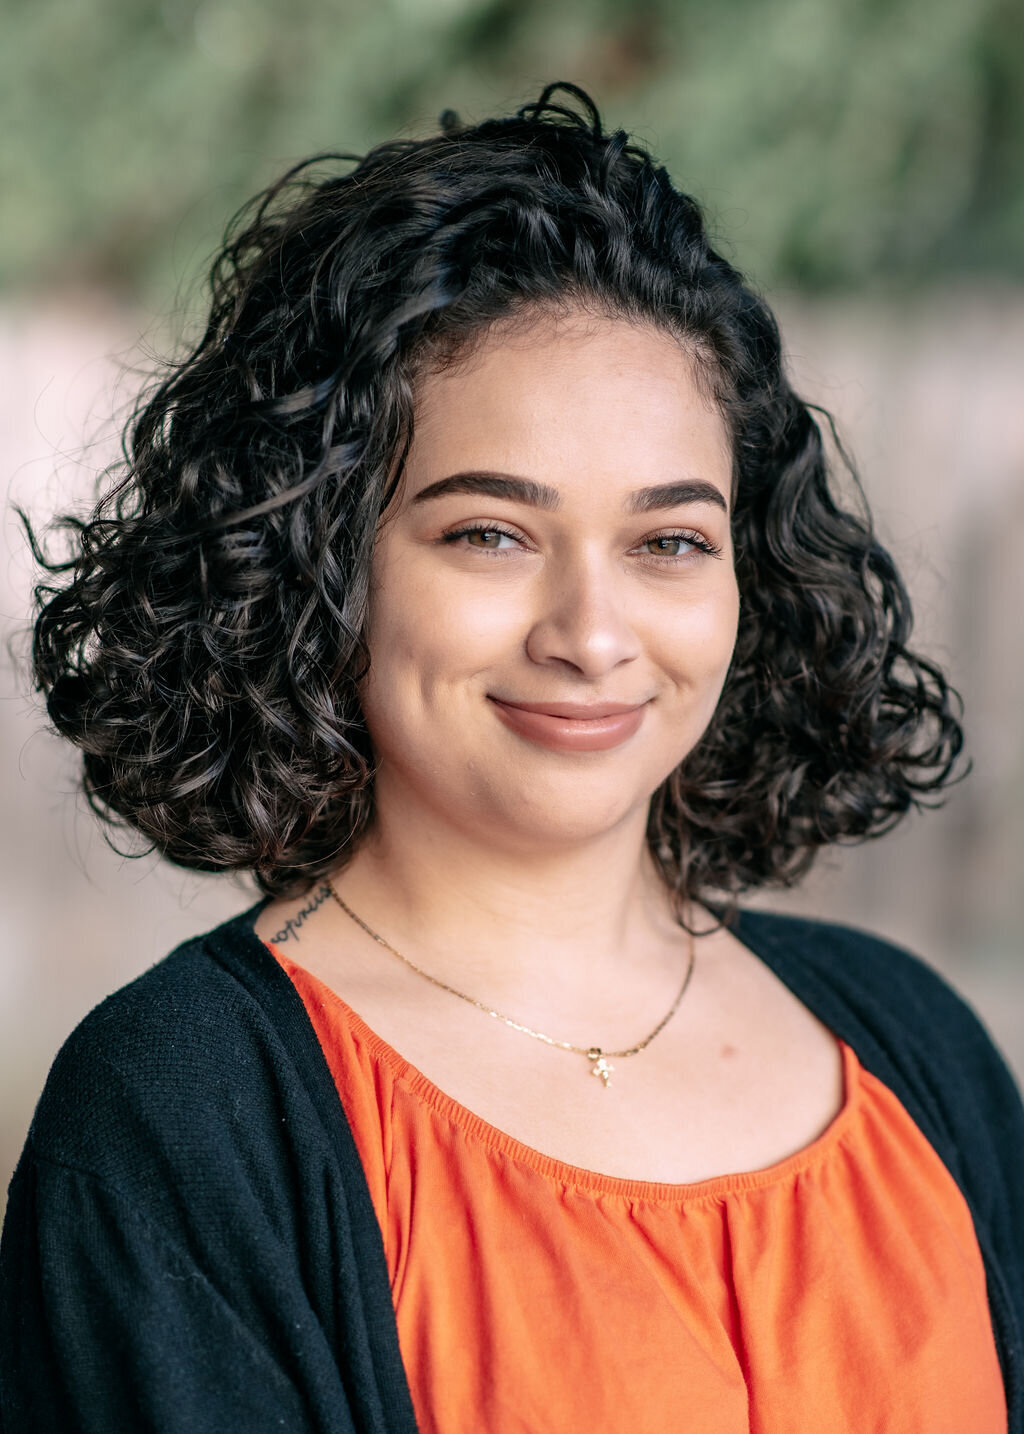 Woman with black curly hair wearing an orange top and a black cardigan stands outside for a headshot with Lisa Winner Photography